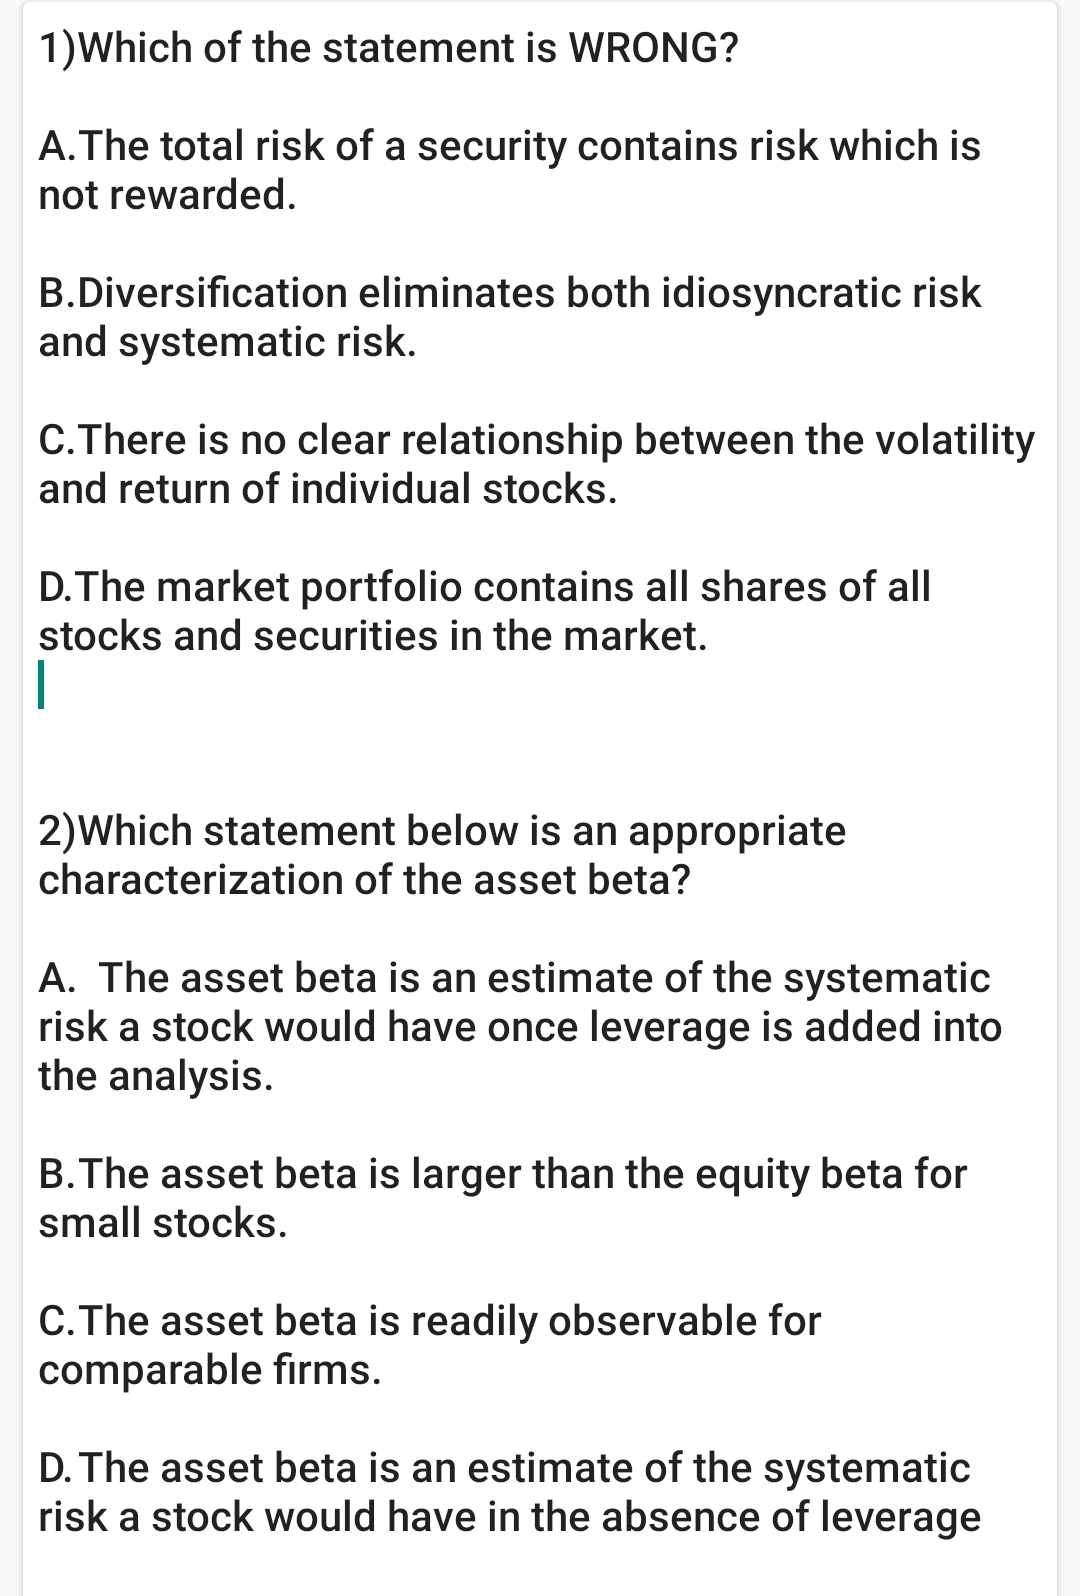 1)Which of the statement is WRONG?
A.The total risk of a security contains risk which is
not rewarded.
B.Diversification eliminates both idiosyncratic risk
and systematic risk.
C.There is no clear relationship between the volatility
and return of individual stocks.
D.The market portfolio contains all shares of all
stocks and securities in the market.
2)Which statement below is an appropriate
characterization of the asset beta?
A. The asset beta is an estimate of the systematic
risk a stock would have once leverage is added into
the analysis.
B.The asset beta is larger than the equity beta for
small stocks.
C.The asset beta is readily observable for
comparable firms.
D. The asset beta is an estimate of the systematic
risk a stock would have in the absence of leverage
